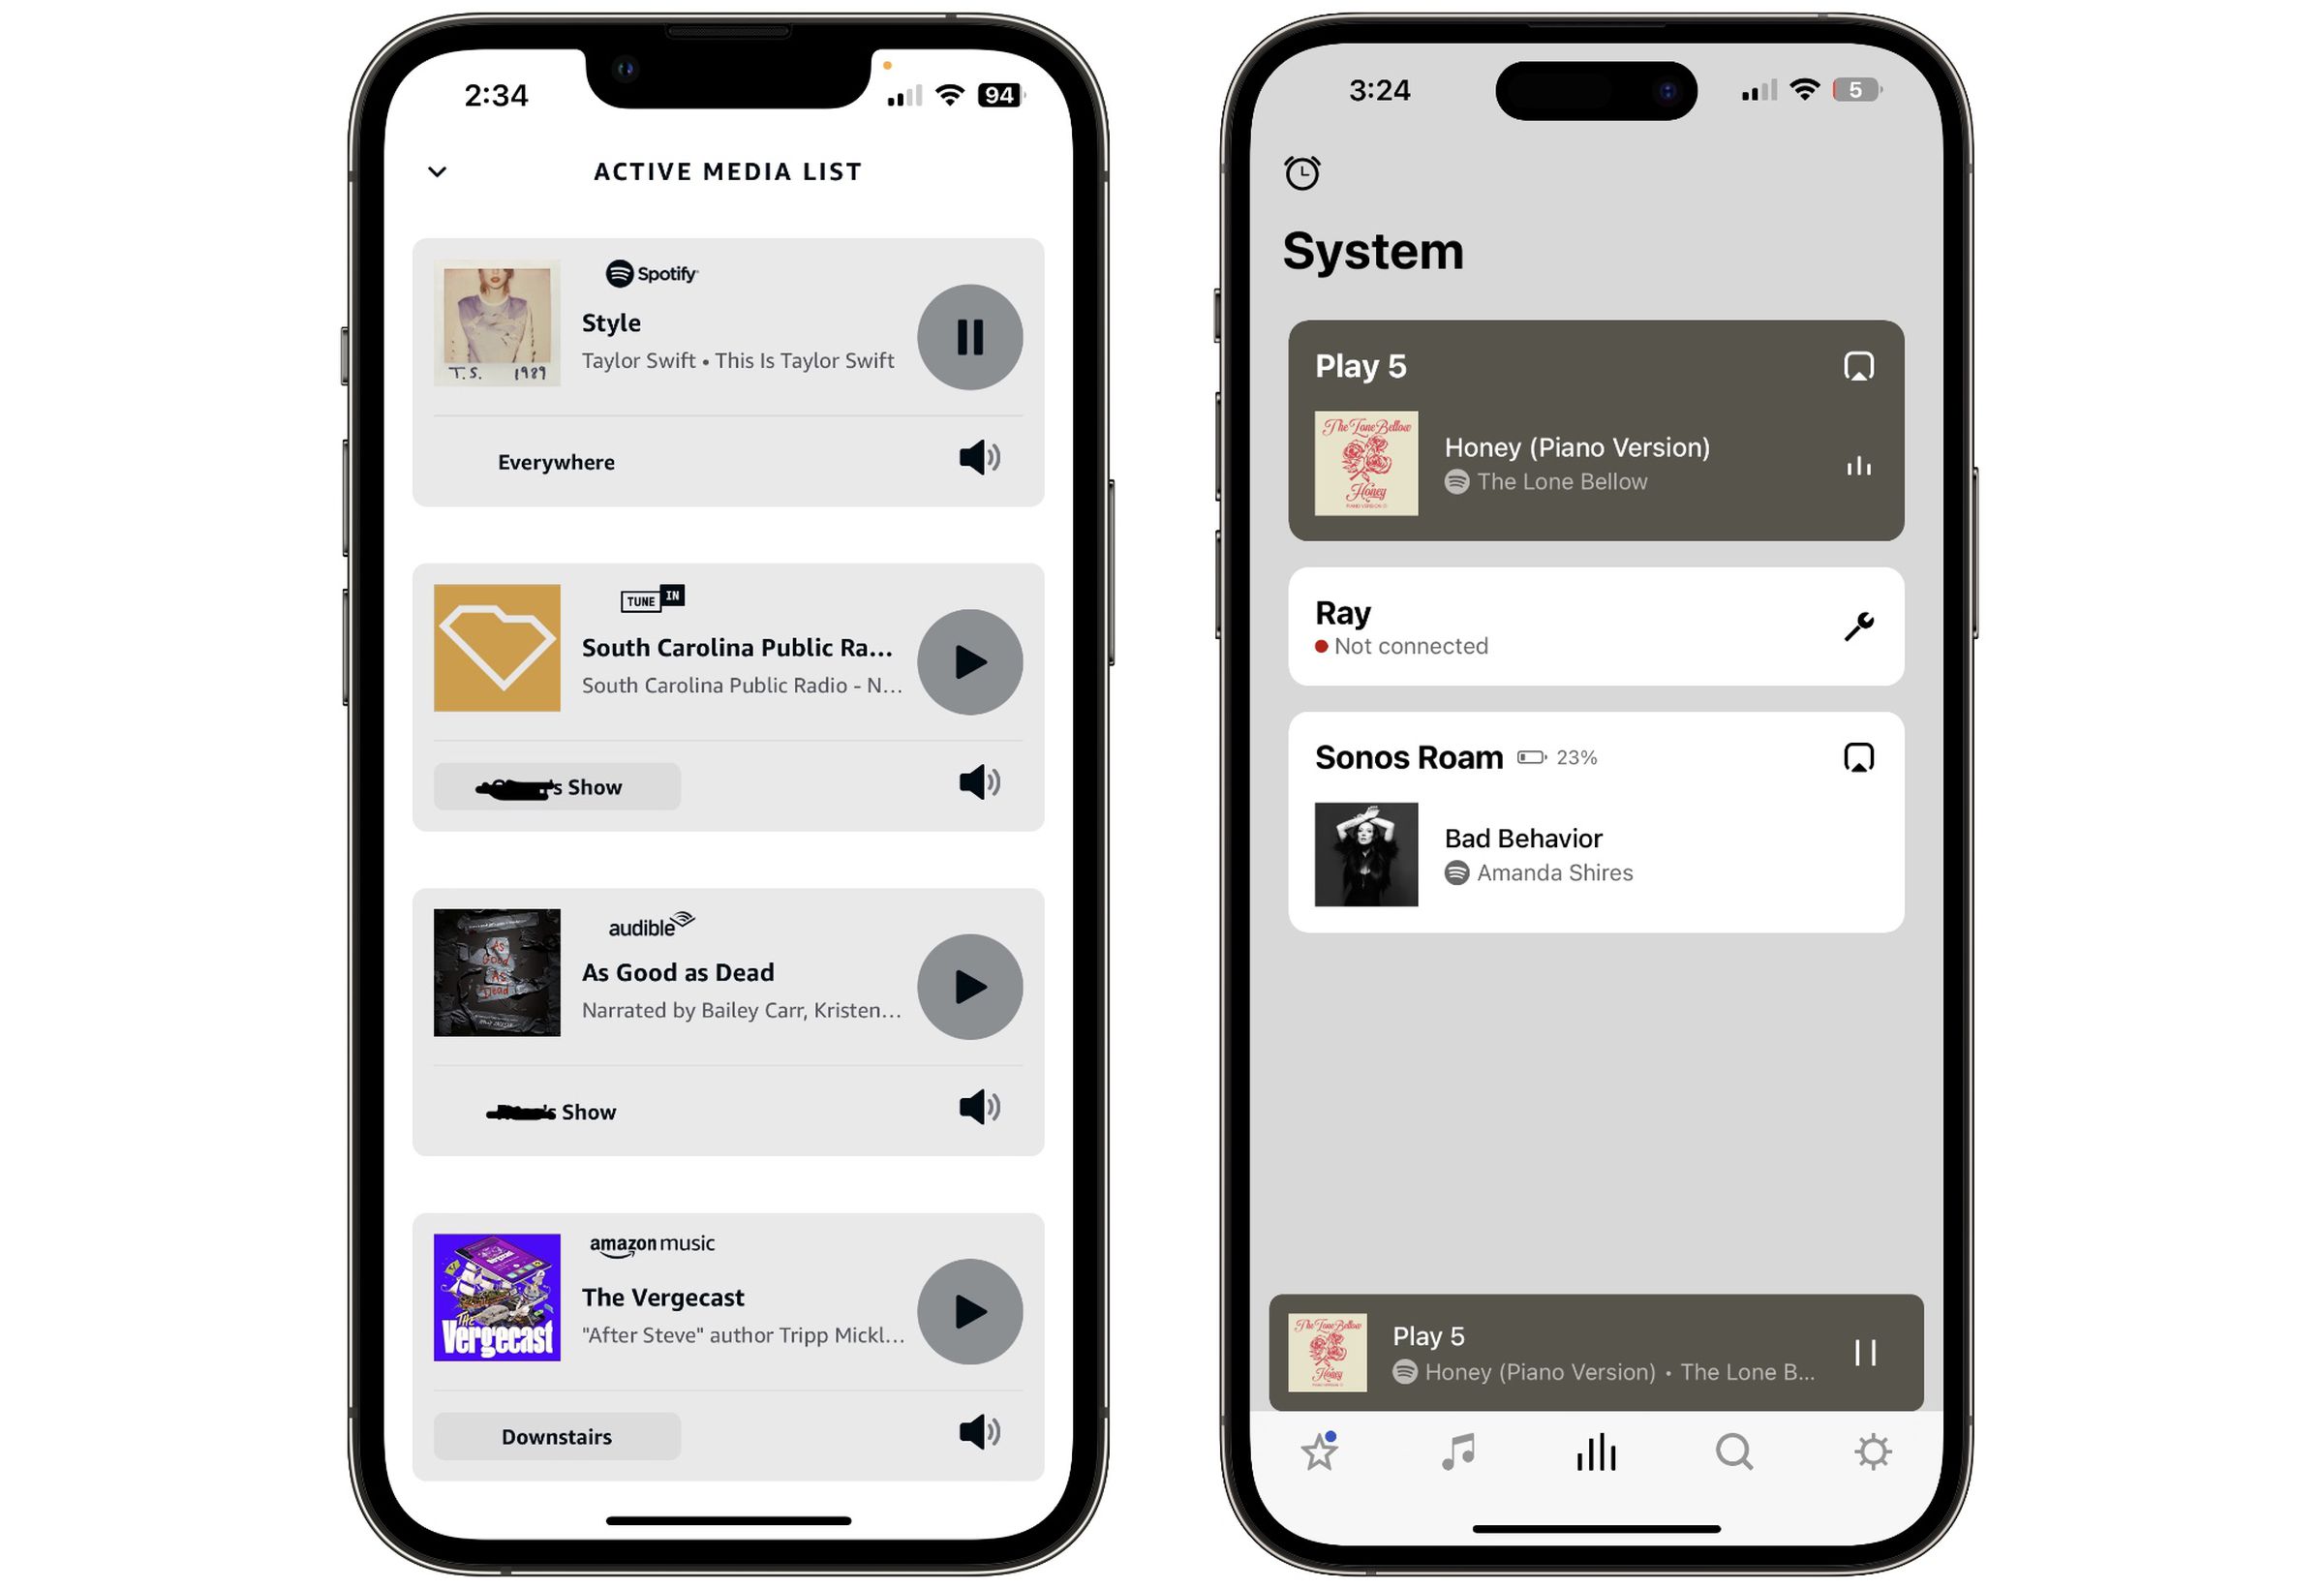 Screenshots comparing the Active Media List in Amazon’s Alexa app and the System screen of the Sonos app.